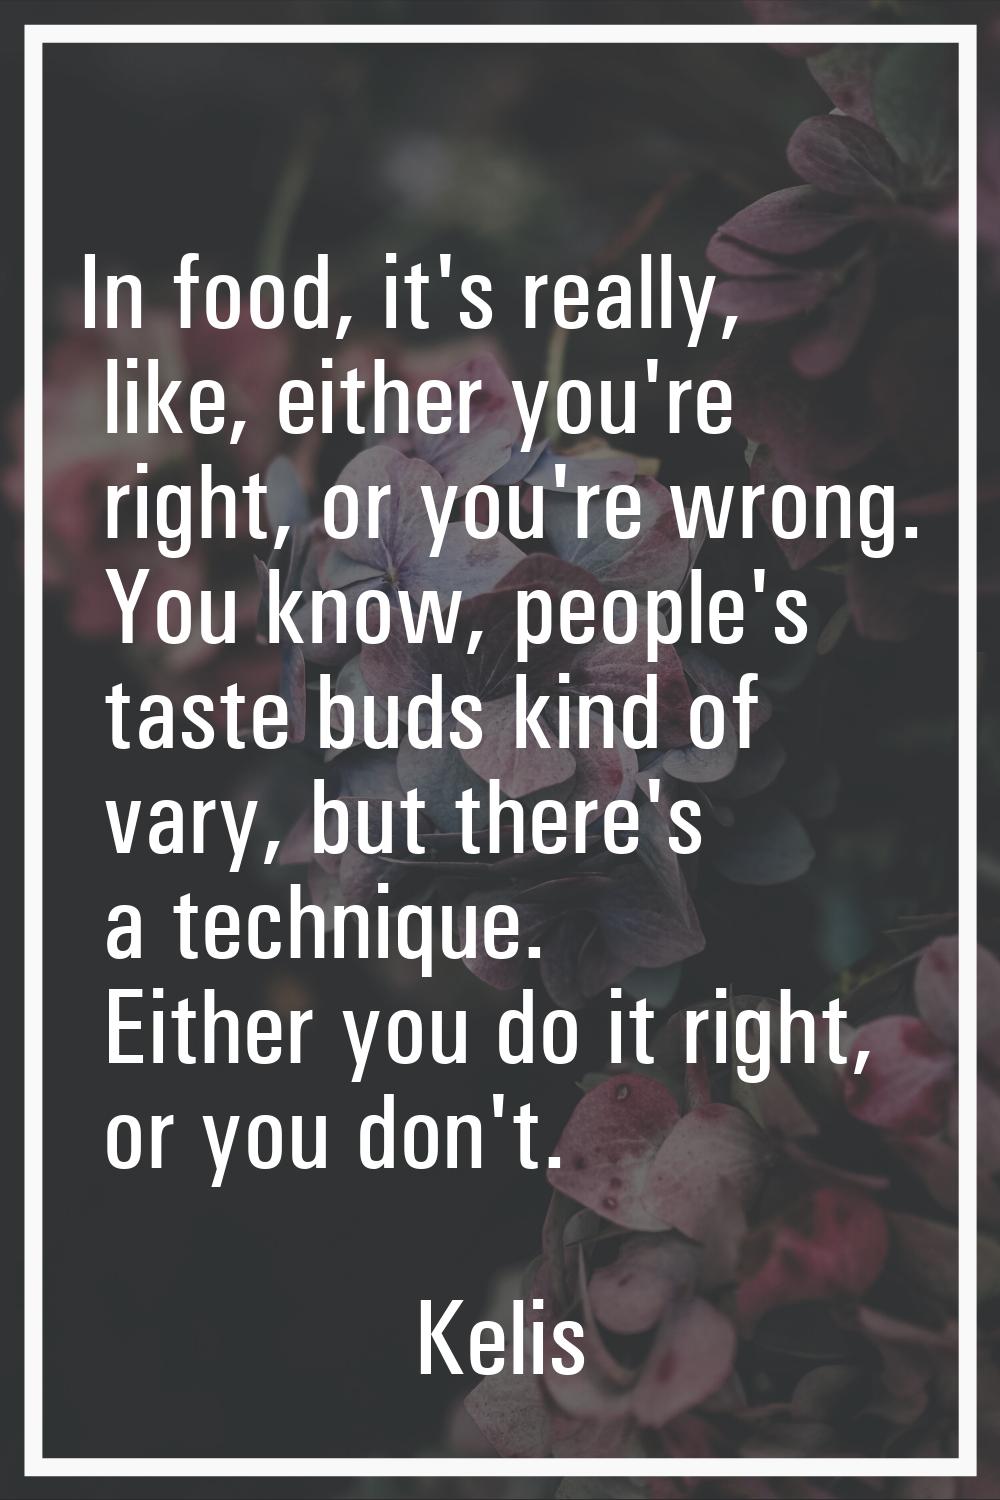 In food, it's really, like, either you're right, or you're wrong. You know, people's taste buds kin